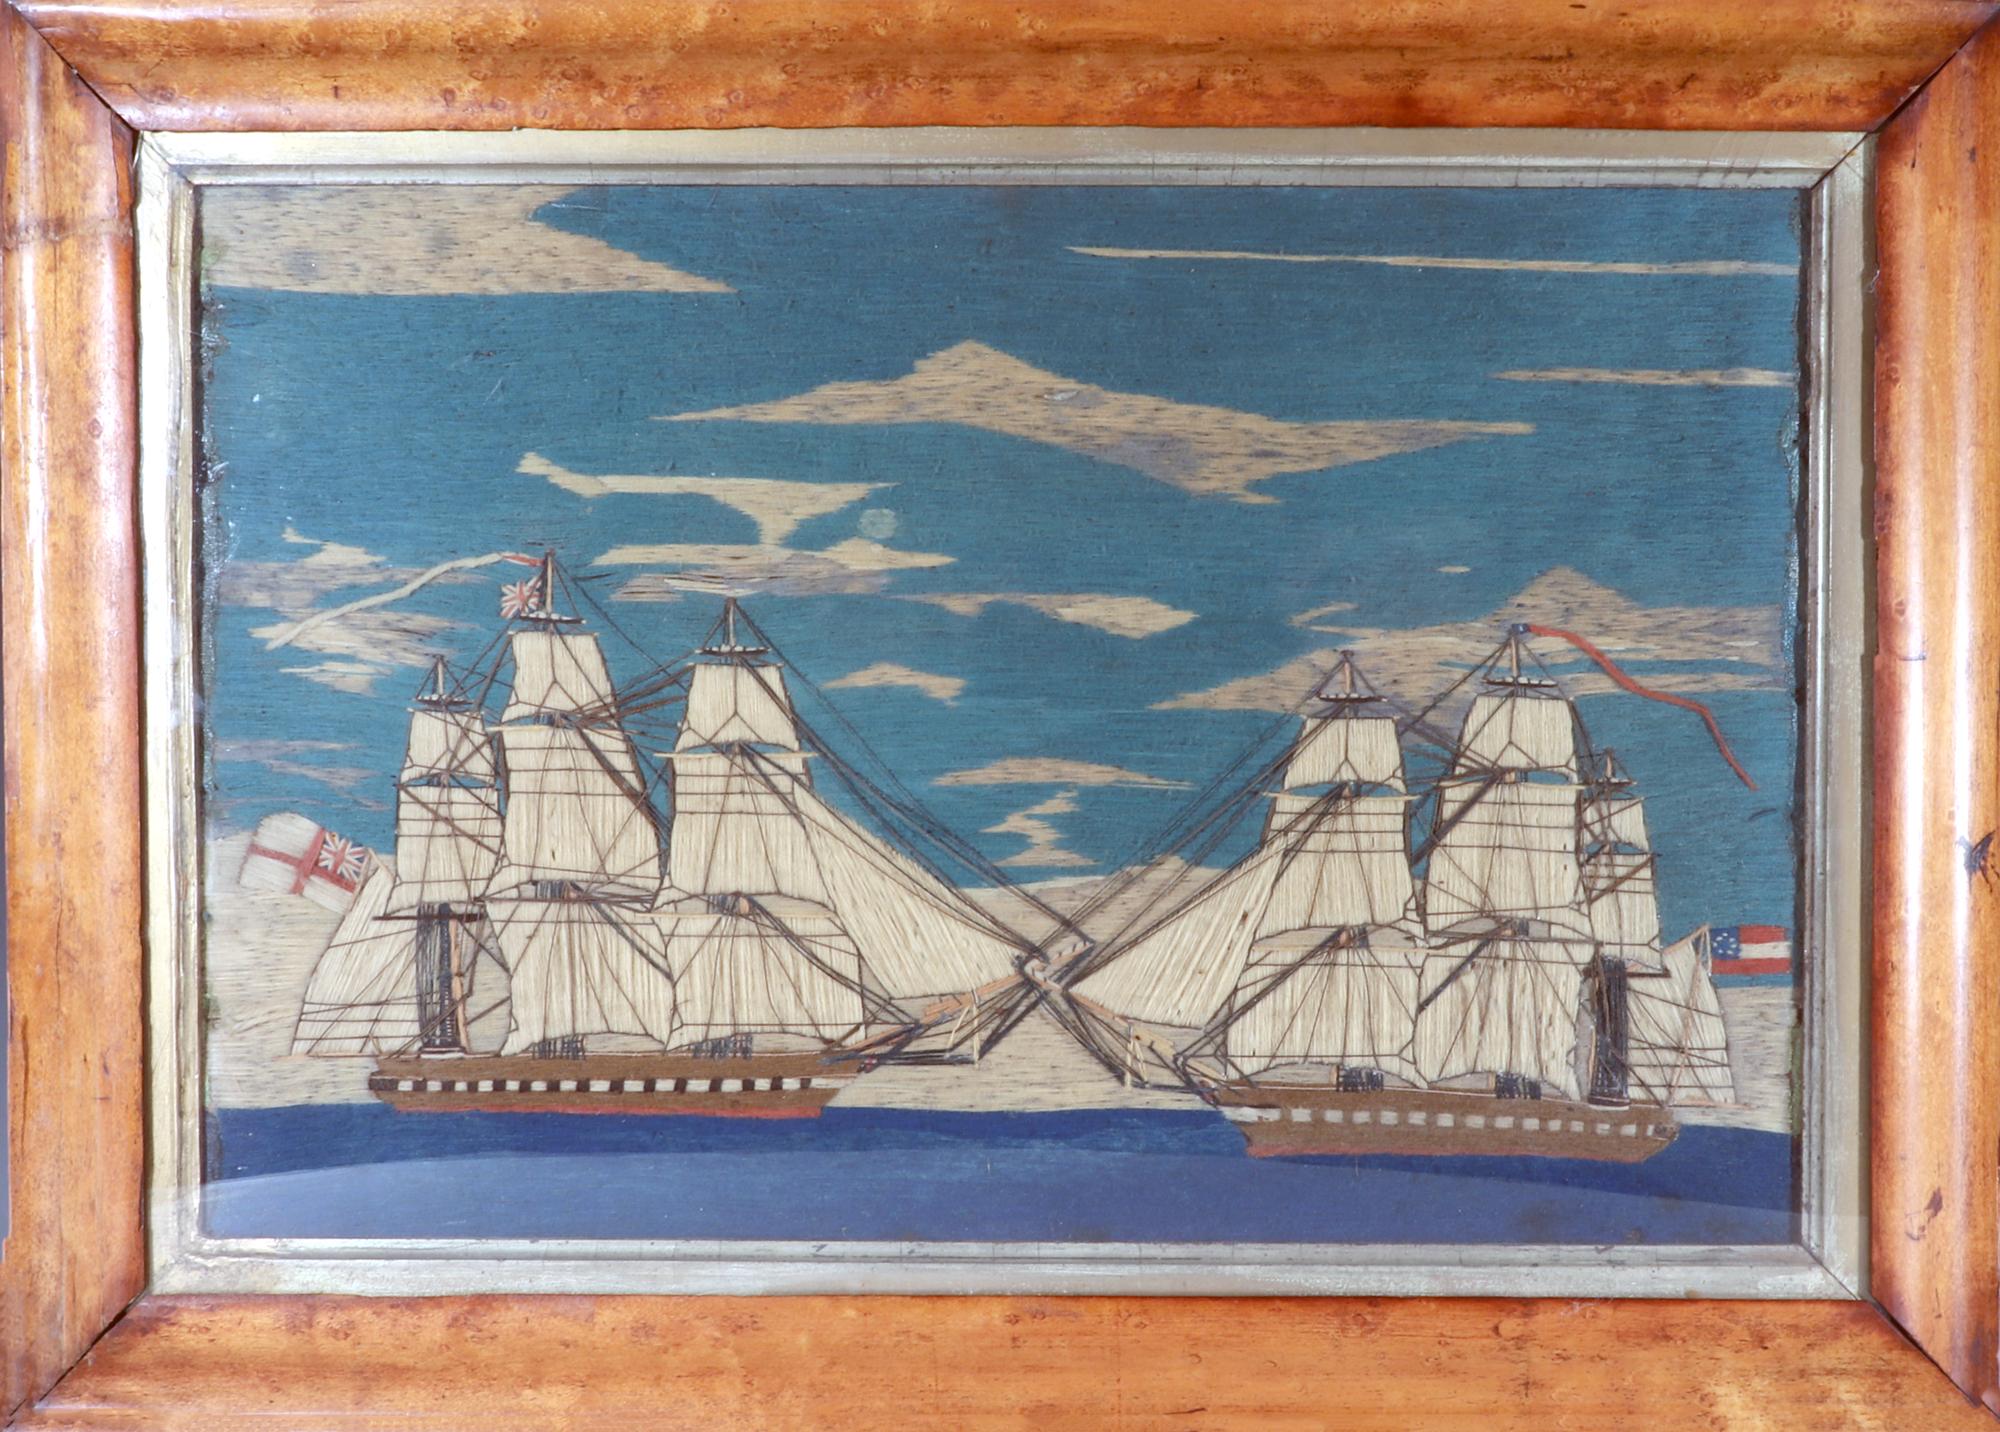 Sailor's Woolwork of A Confederate & British Ship Passing on the High Seas,
Circa 1861

The small British sailor's woolwork depicts two ships under full sail passing on the high sea. One ship flies the White Ensign and the Union Jack from the